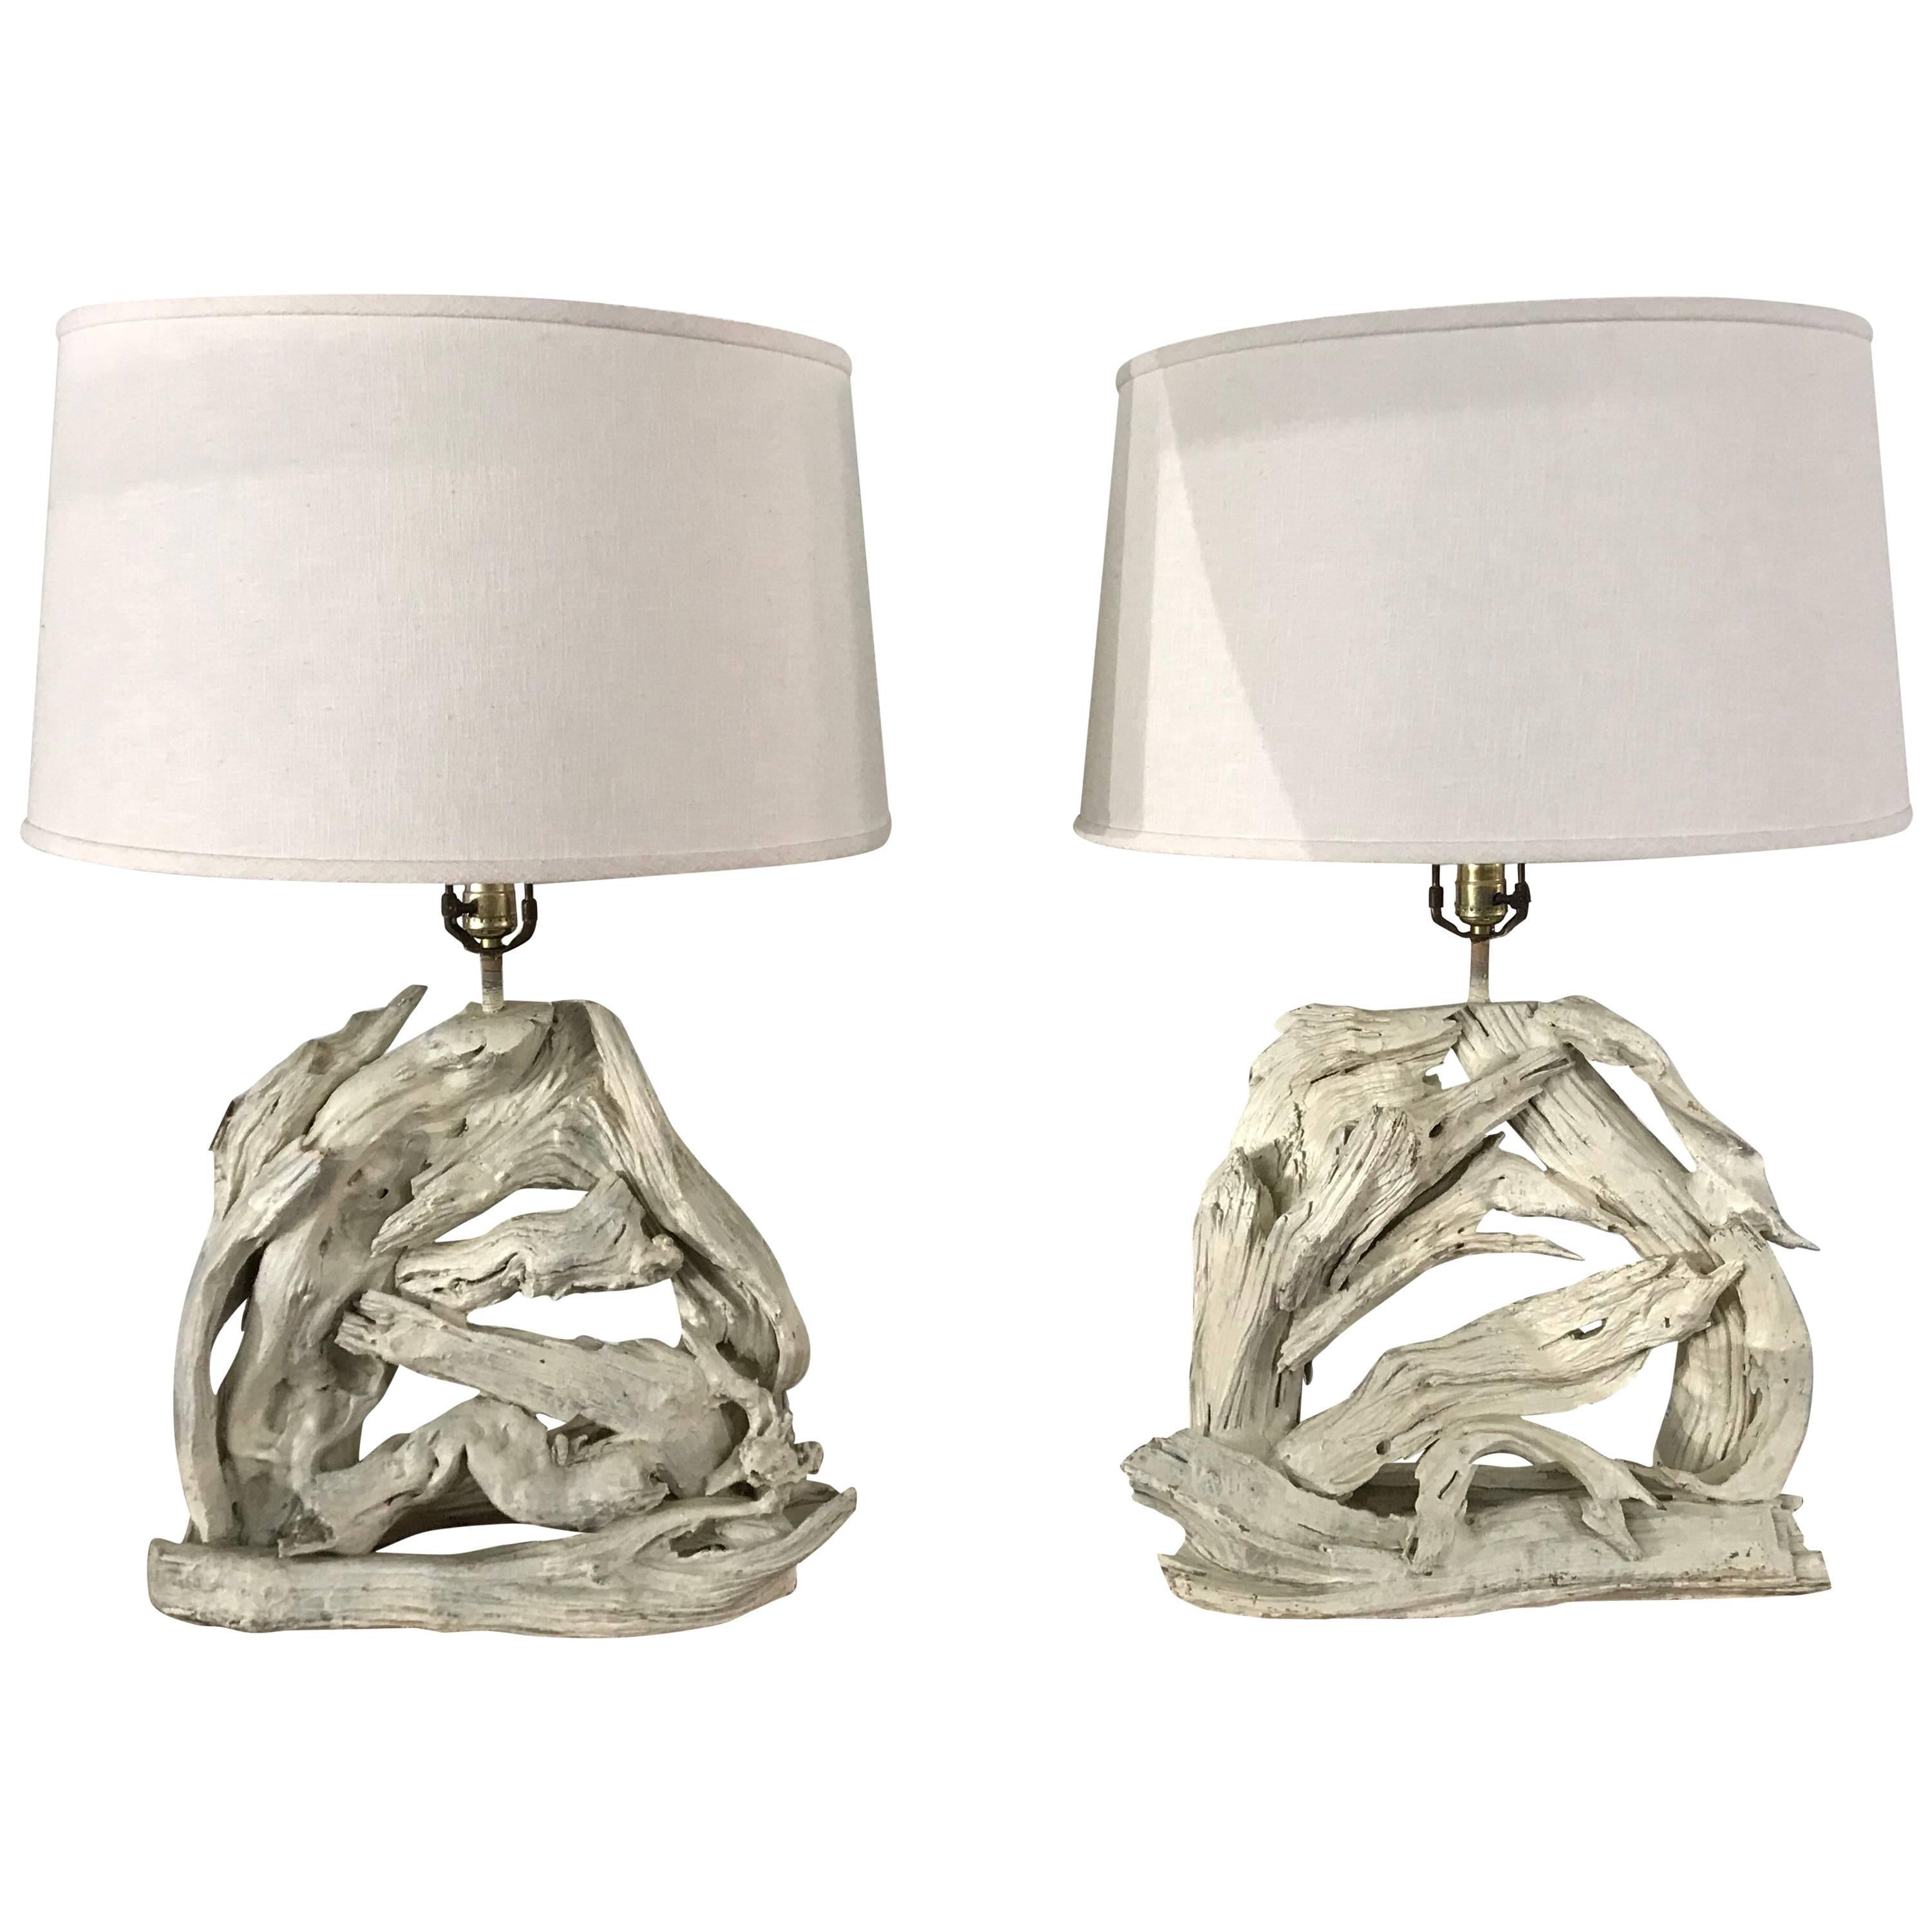 Monumental Pair of Driftwood Lamps